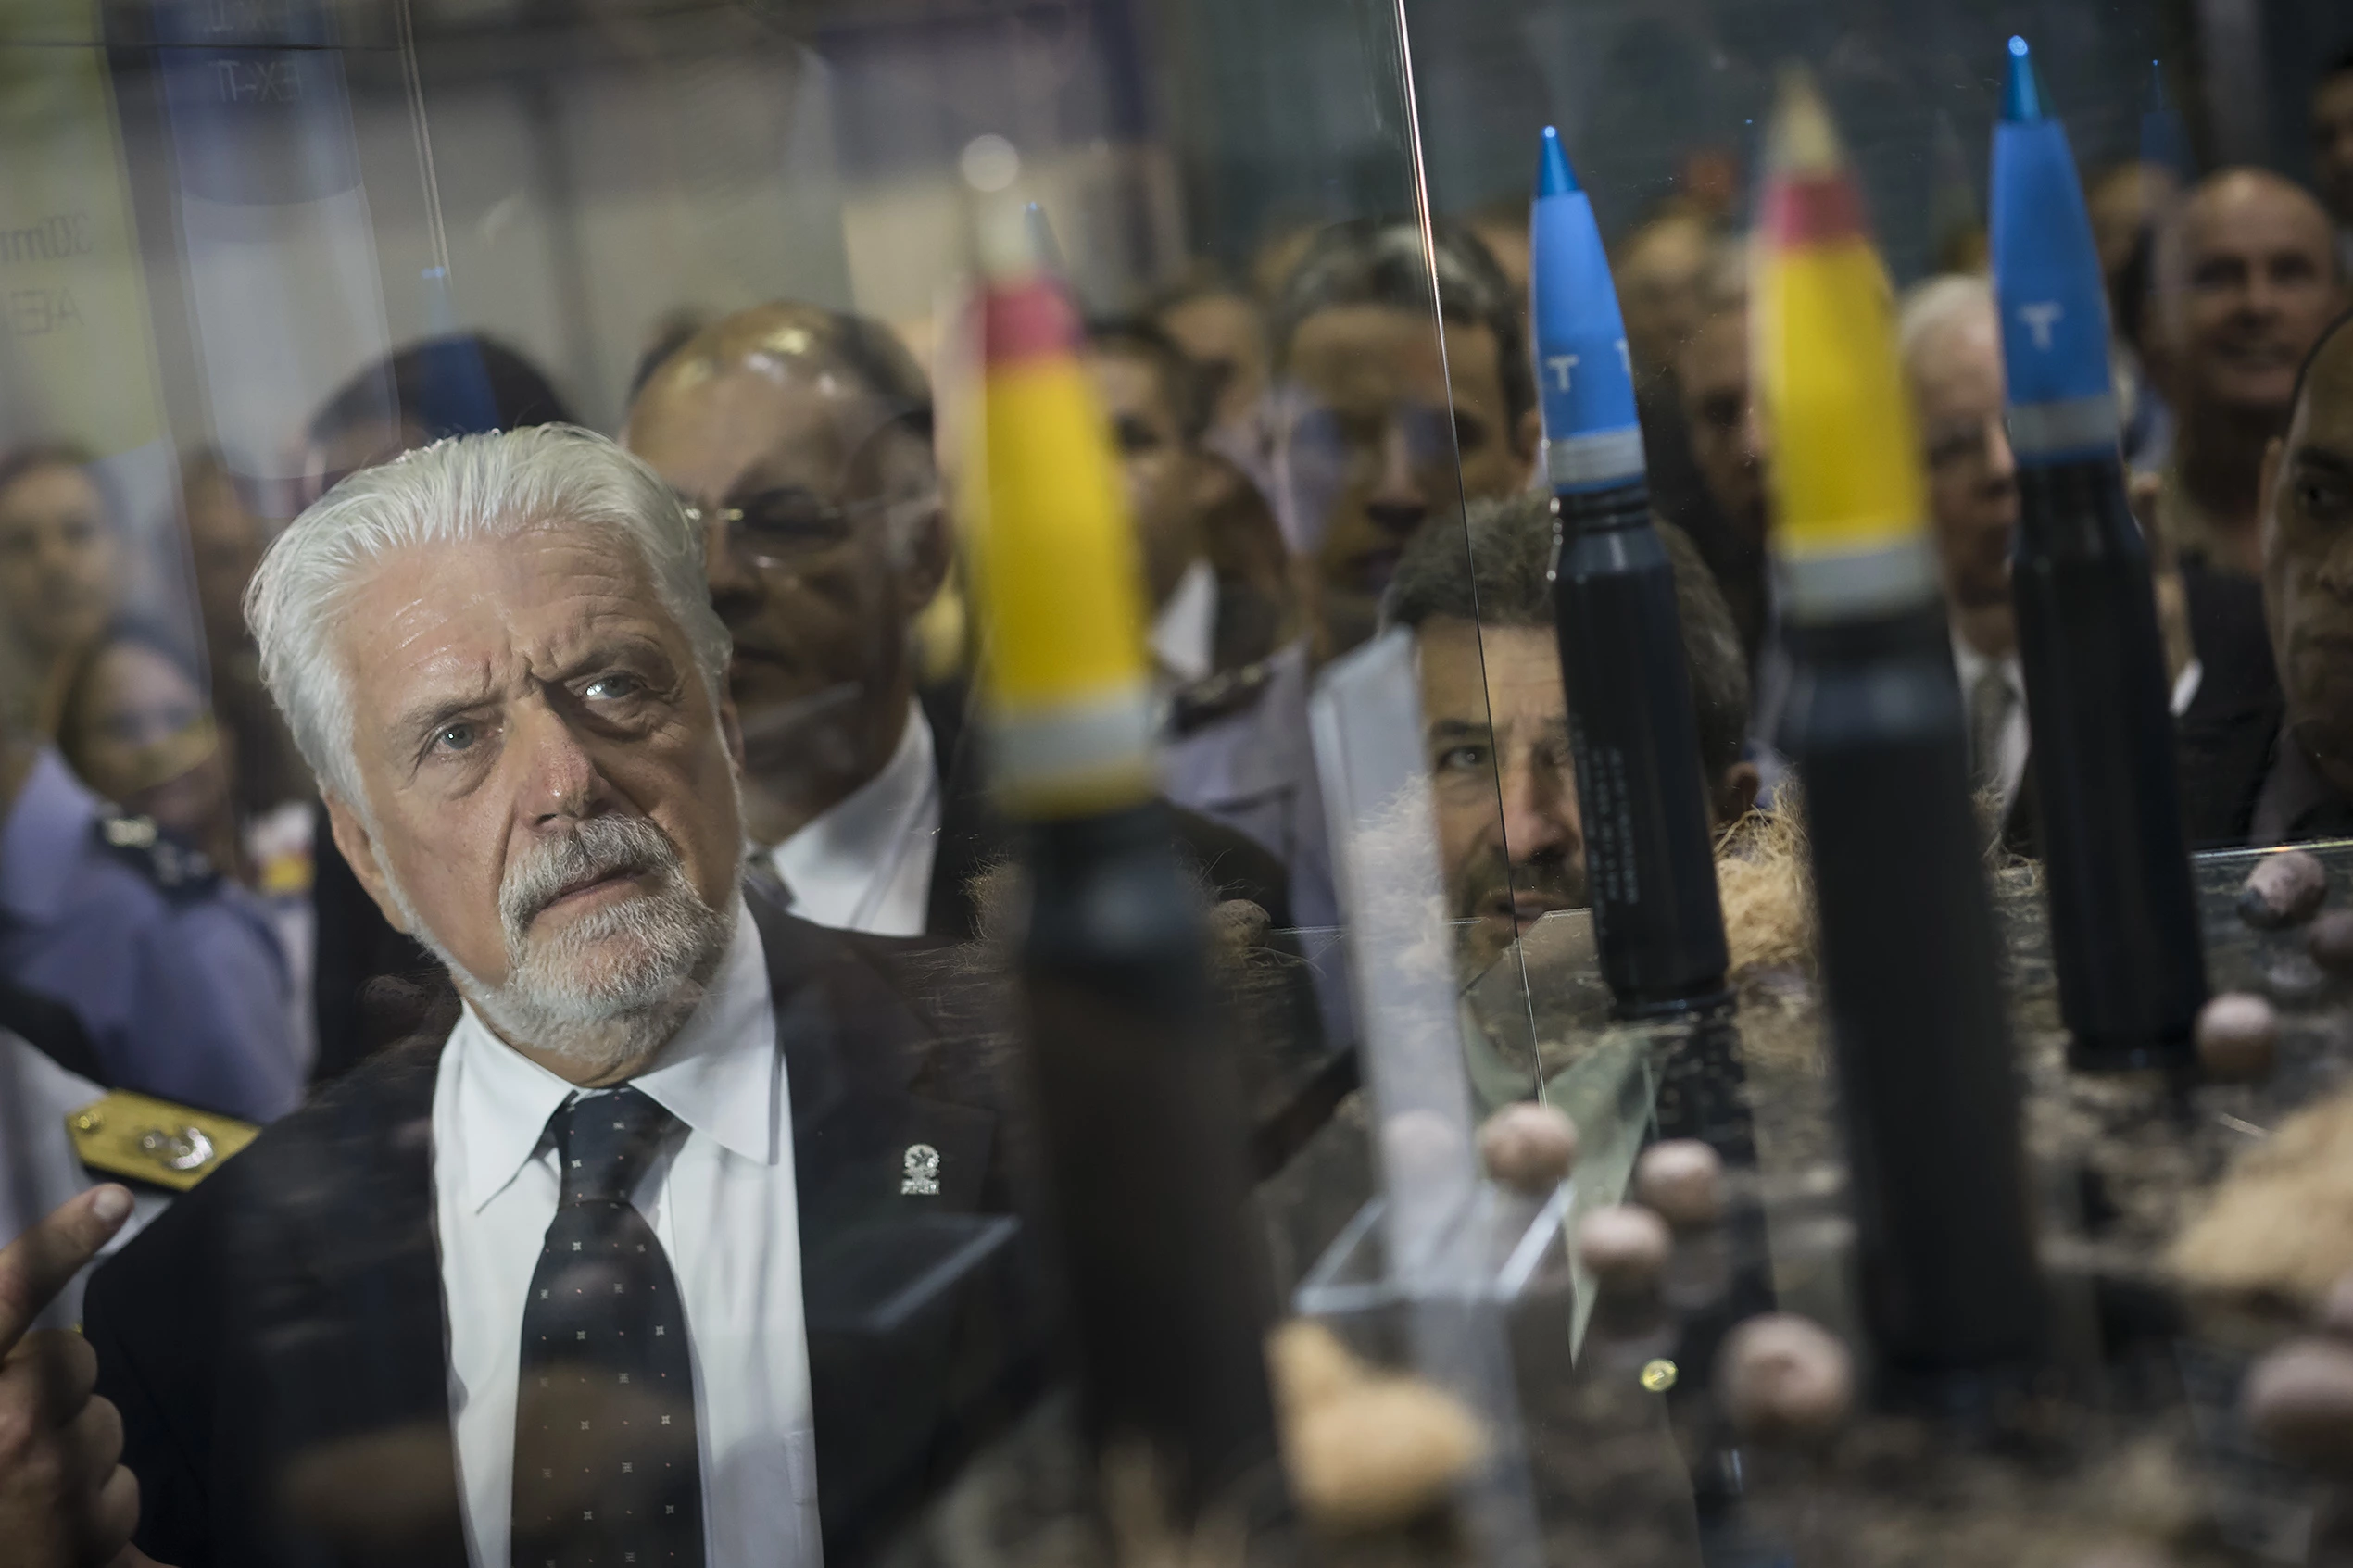 Brazil's Defense Minister Jaques Wagner looks at ammunition as he tours the LAAD Defense and Security International Exhibition in Rio de Janeiro, Brazil, Tuesday, April 14, 2015. (AP Photo/Felipe Dana)